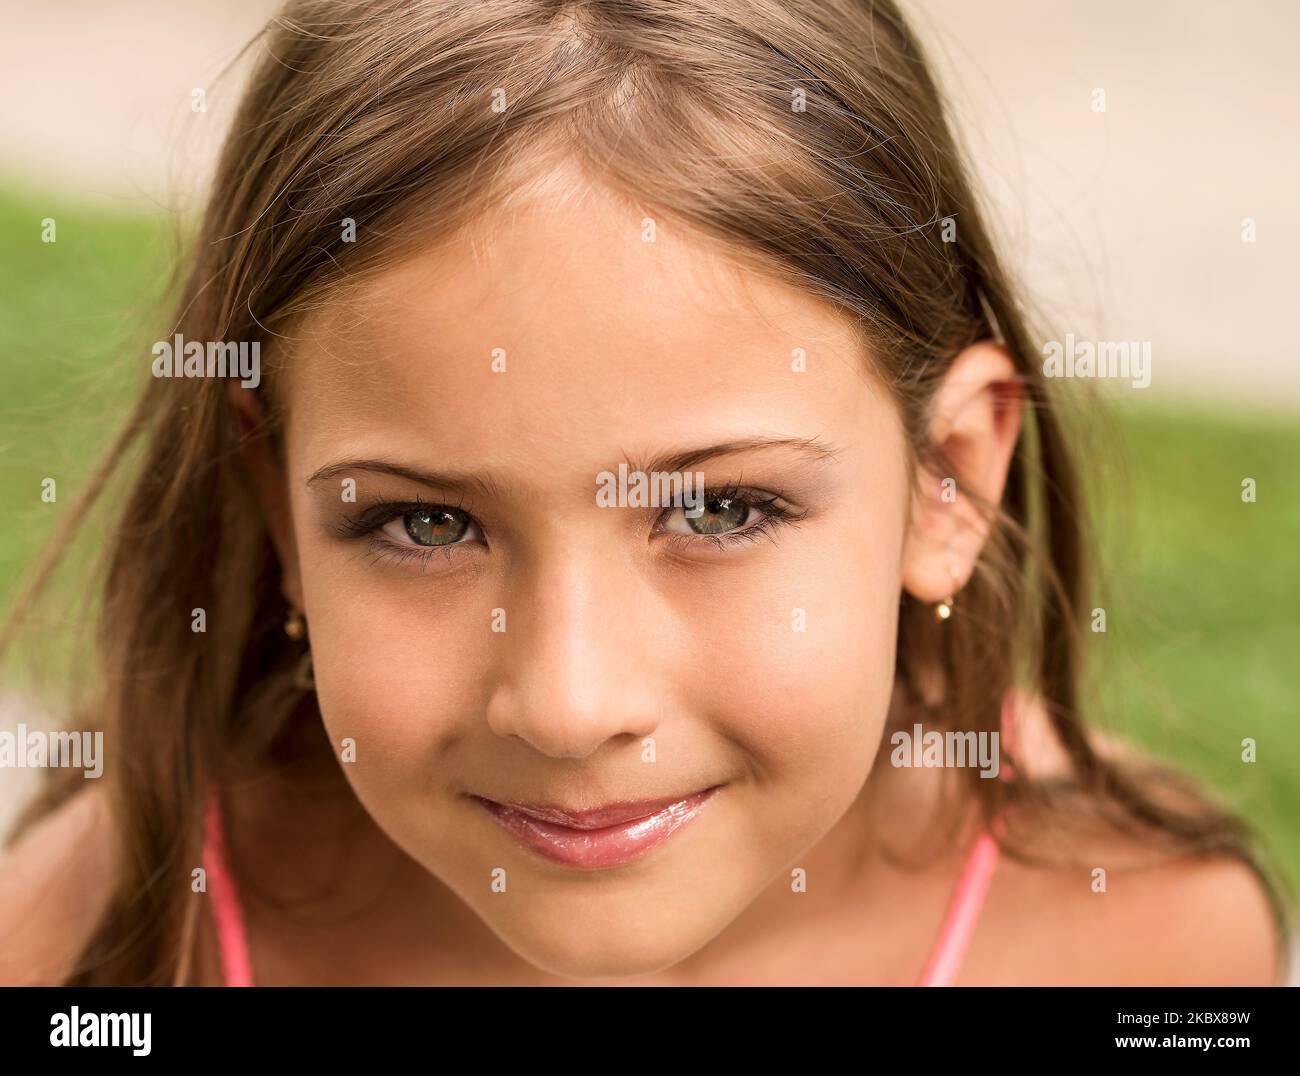 Portrait of a cute happy girl with blue eyes and a beautiful smile Stock Photo